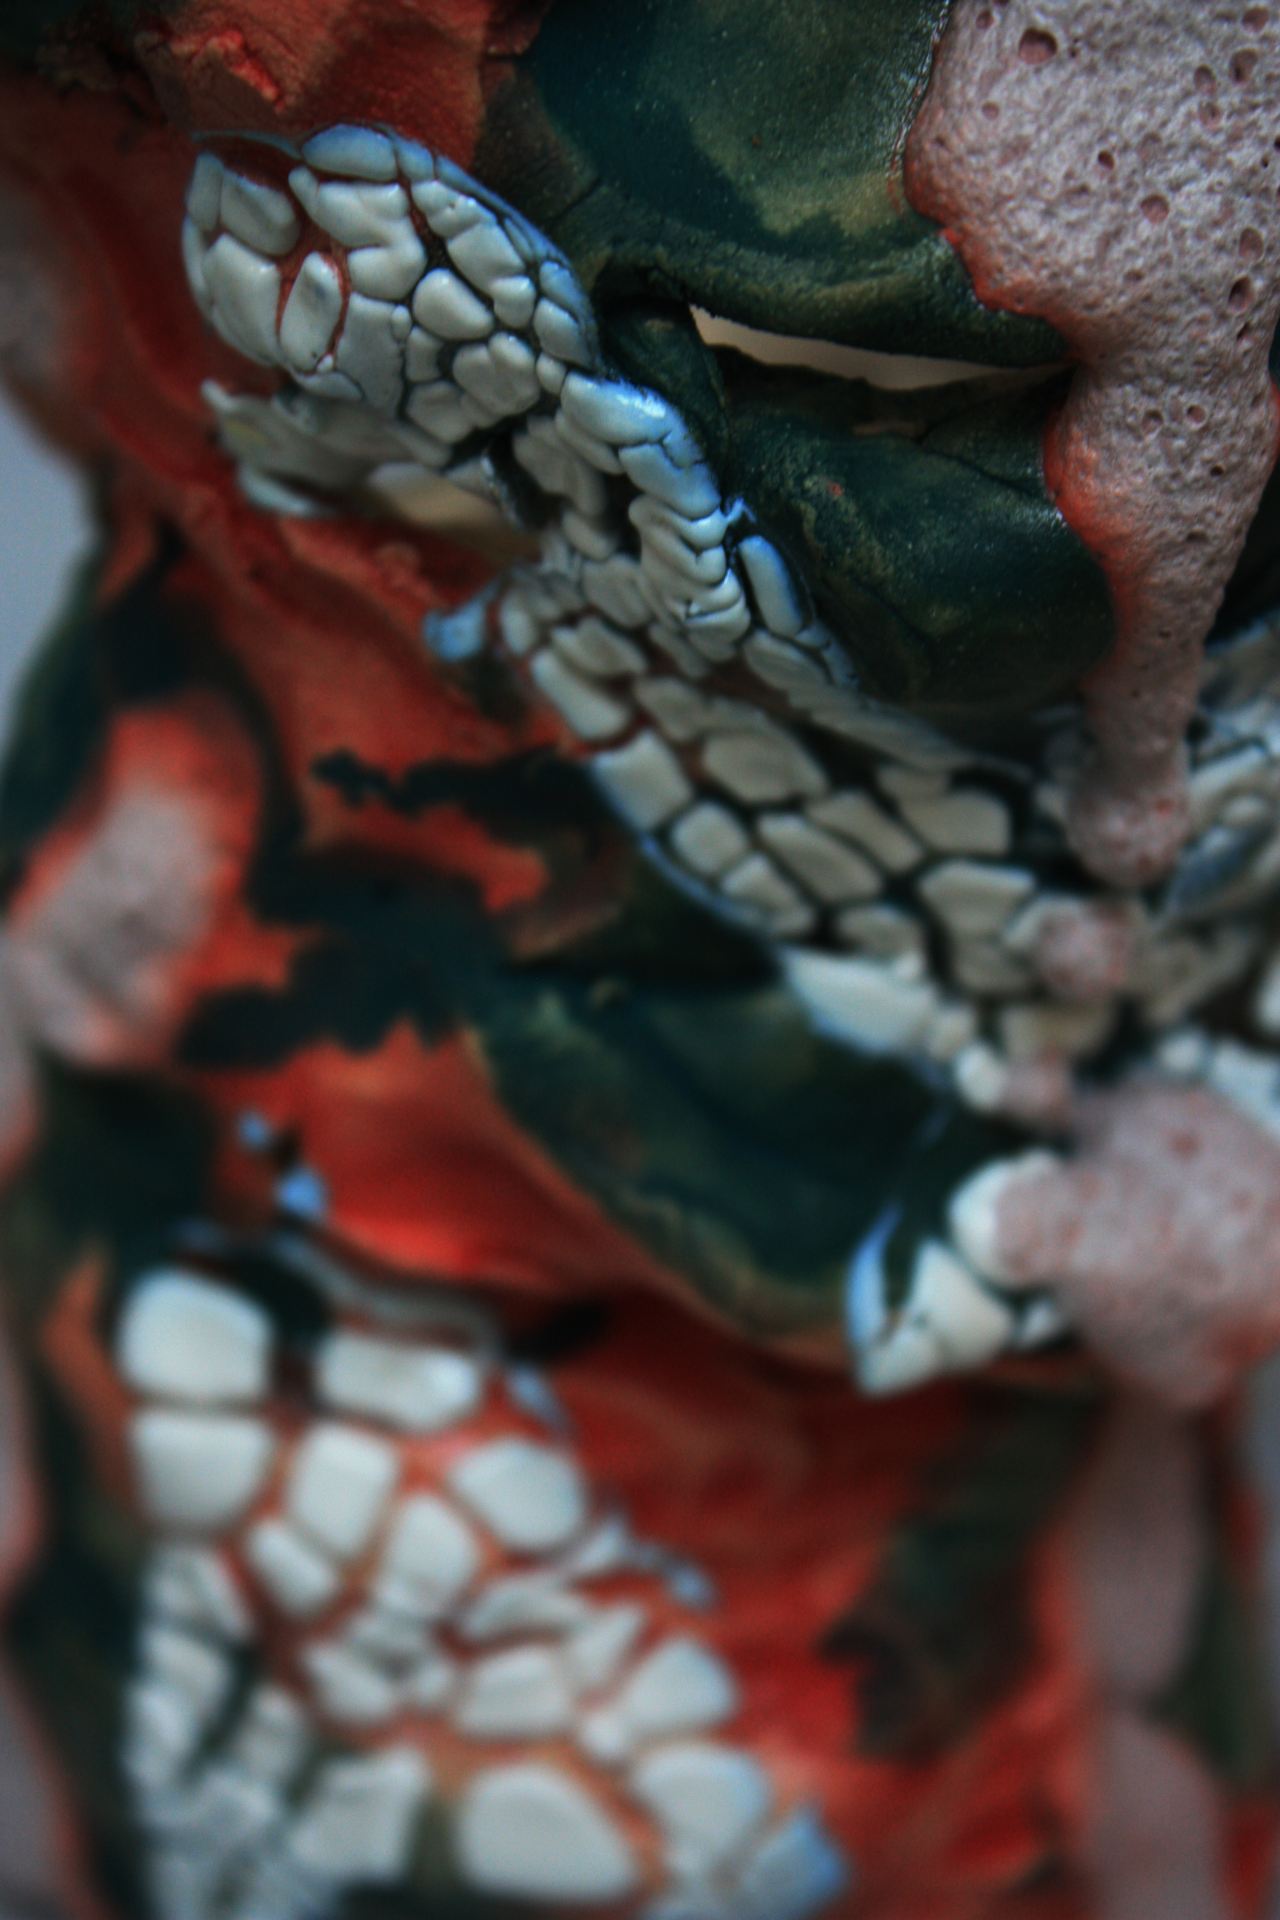 A close-up detail shot of a red, white and black ceramic object.